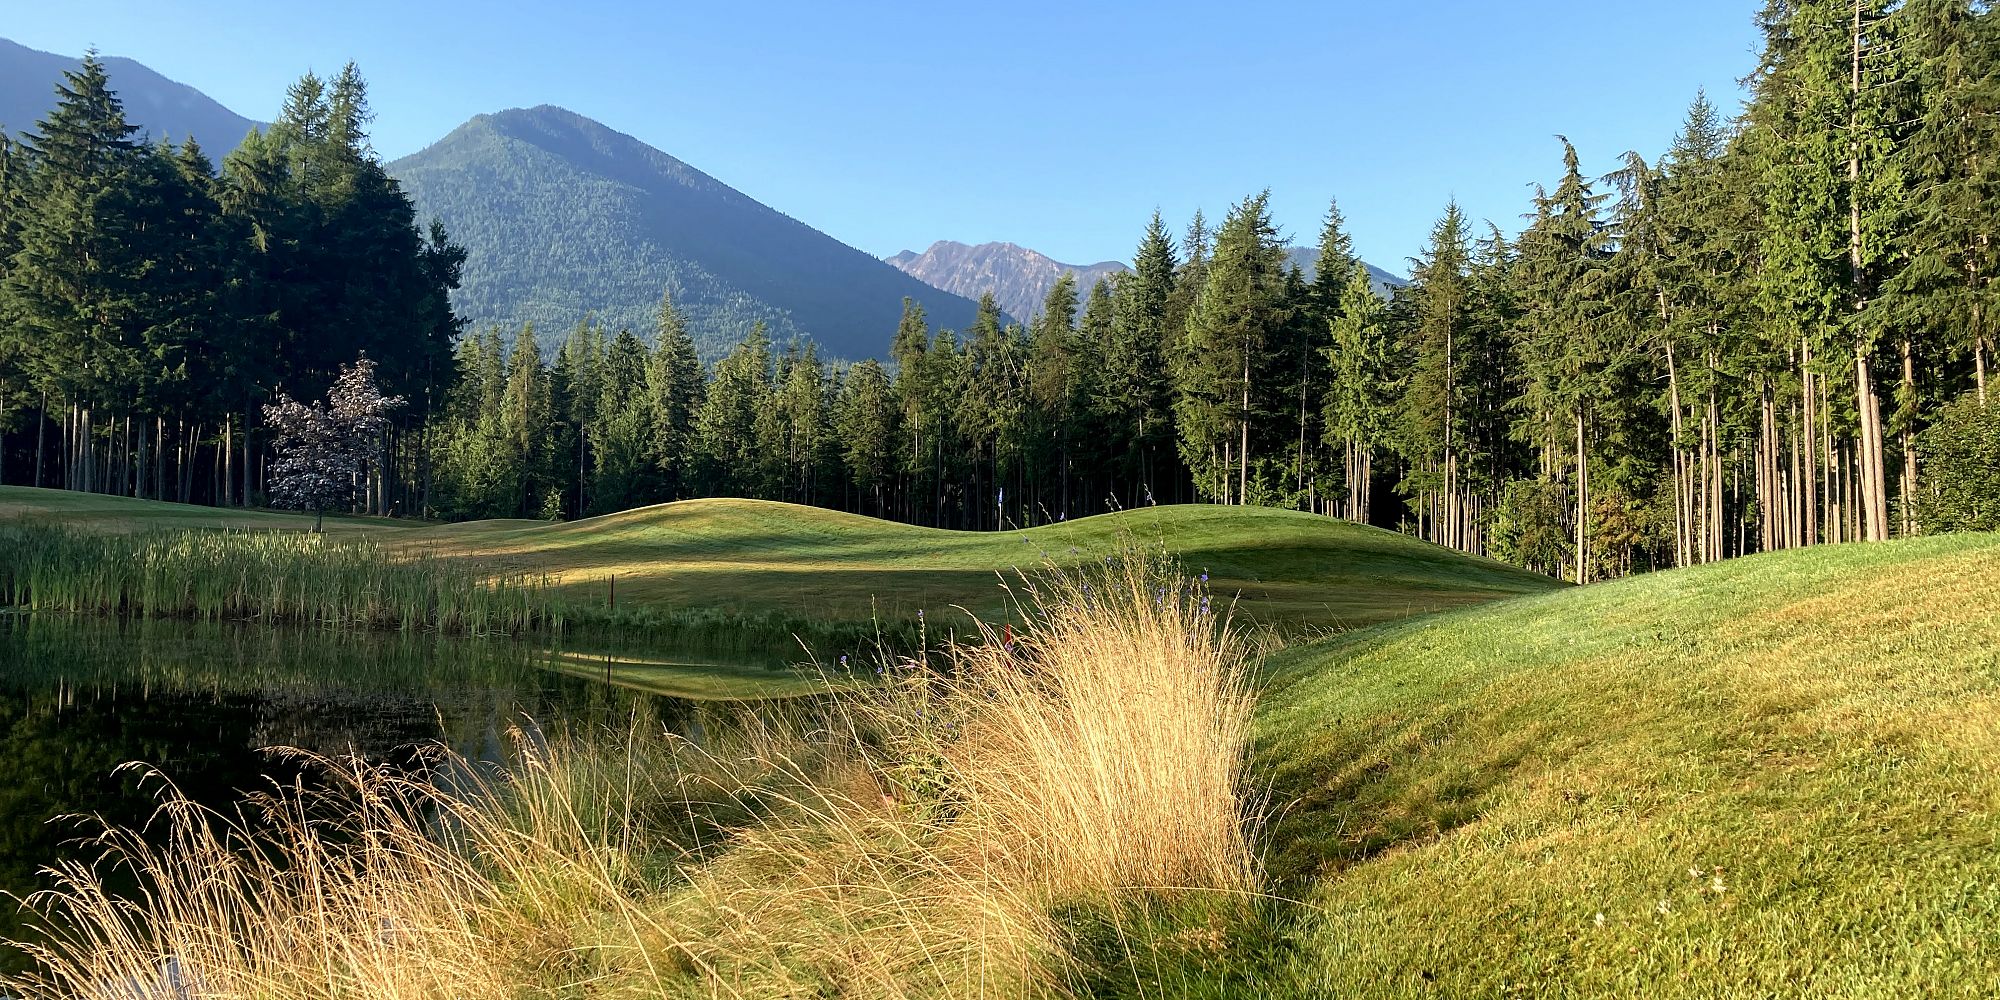 The First Choice for Golf in the West Kootenay Region